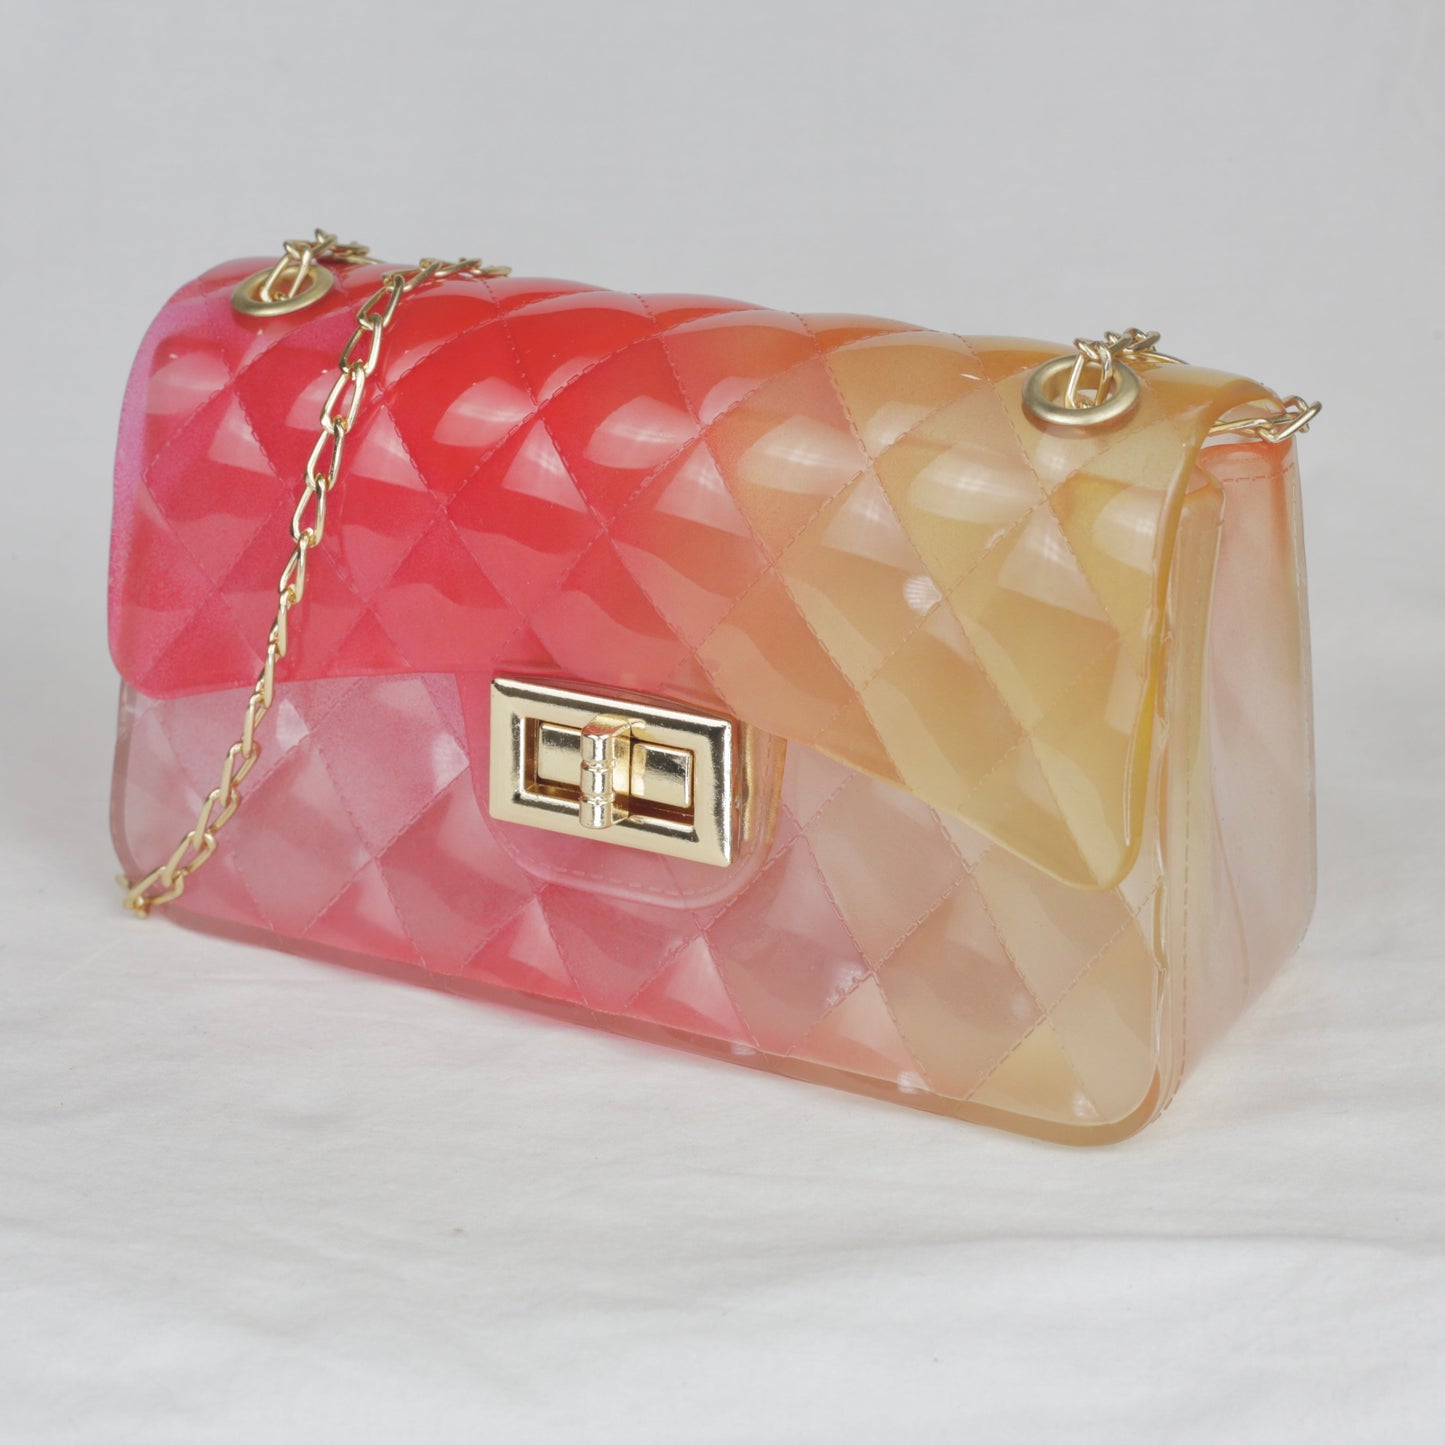 Ombré Jelly Sling Bag - The Accessorys Official